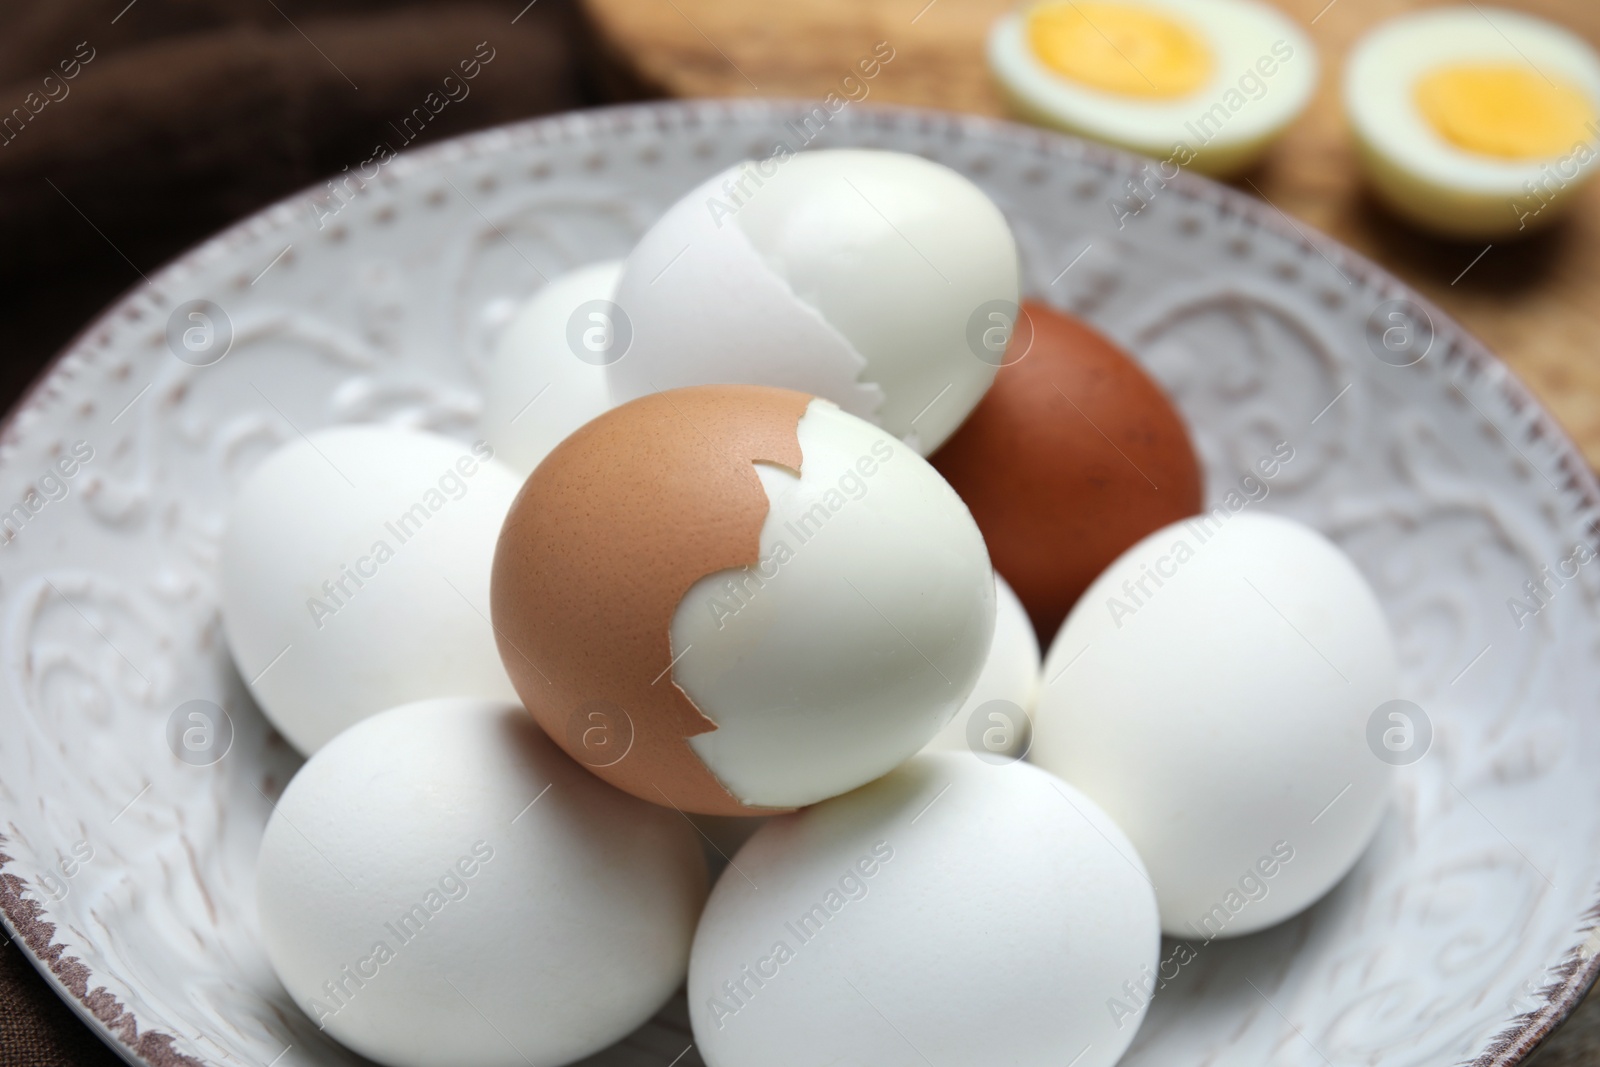 Photo of Many boiled eggs on plate, closeup view